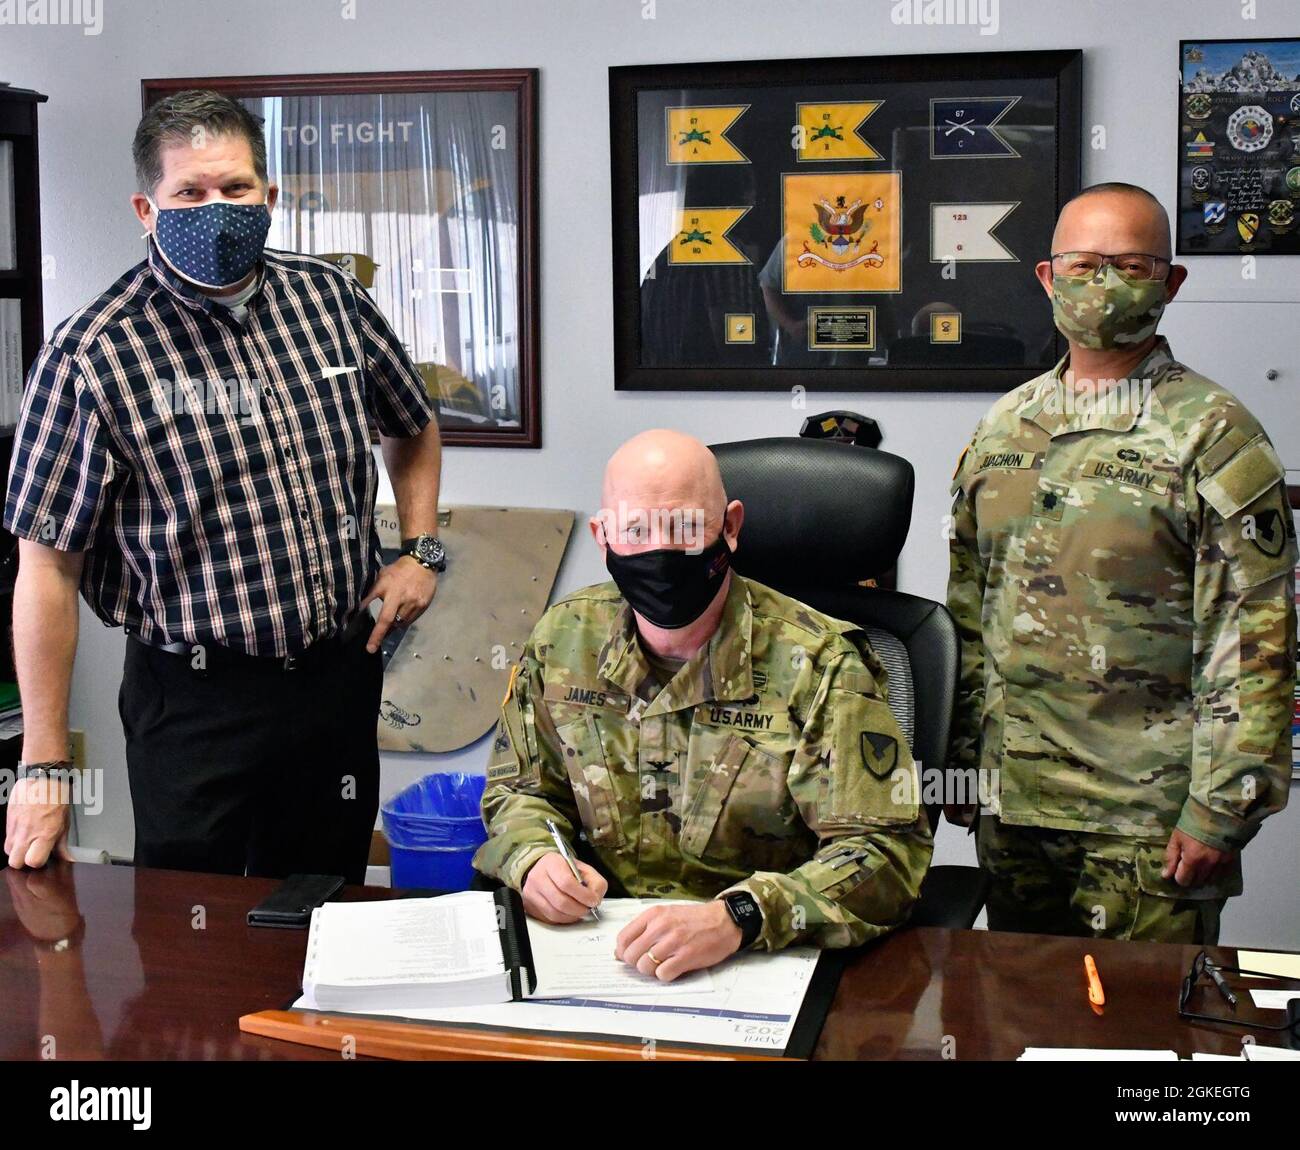 U.S. Army Col. Stu James, commander, U.S. Army Garrison Fort Bliss, center, signs the Fort Bliss Installation Mobilization Support Plan, March 31, 2021, Fort Bliss, Texas. James is accompanied by Mr. Jaymes Picott, mobilization chief, left; and Lt. Col. John Juachon, mobilization planner, right; both assigned to the Mobilization Division, Directorate of Plans, Training, Mobilization & Security (DPTMS). Stock Photo